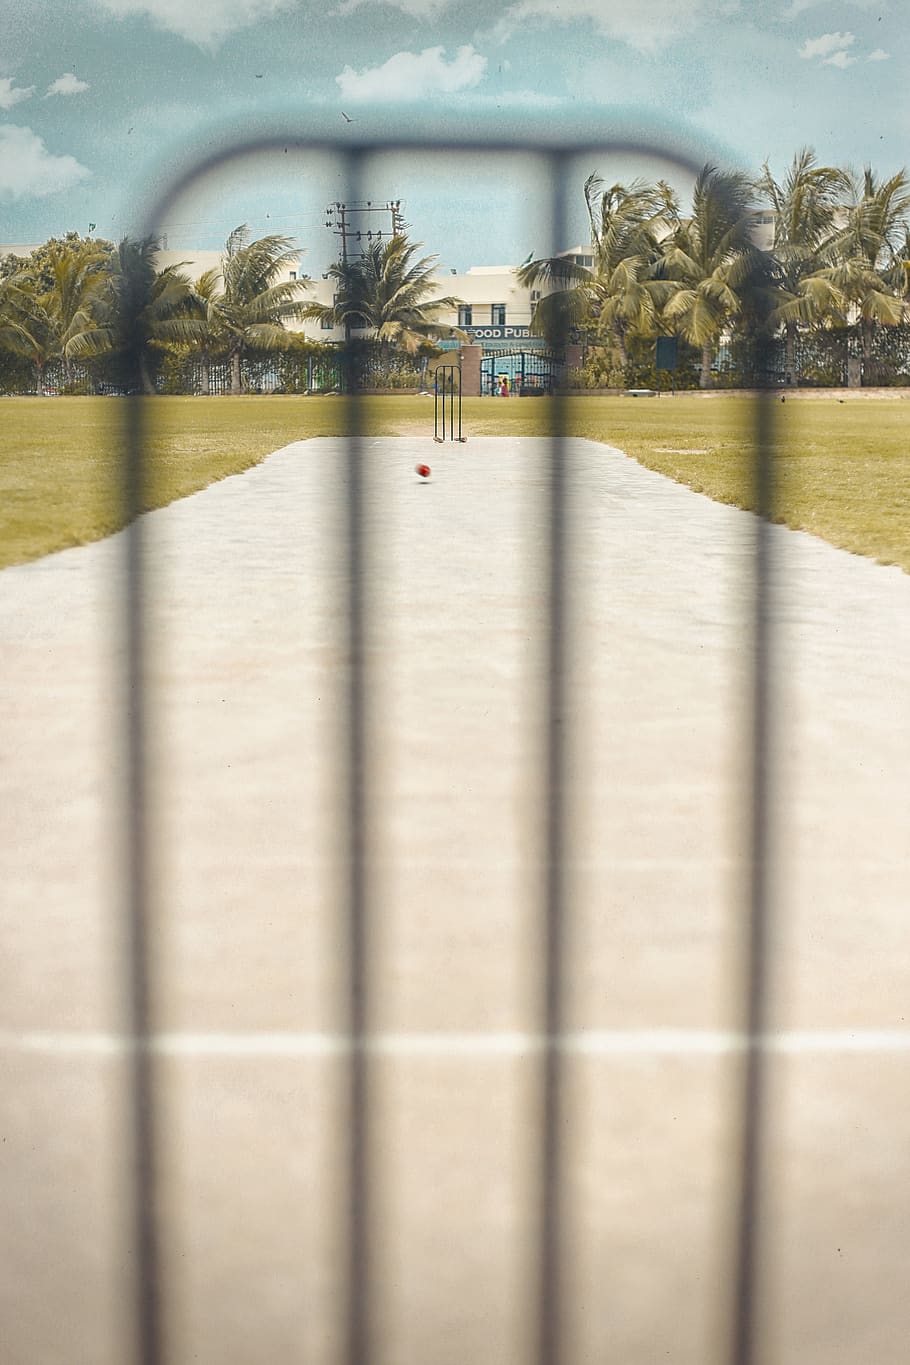 cricket, ball, trees, pitch, composition, beautiful, amazing